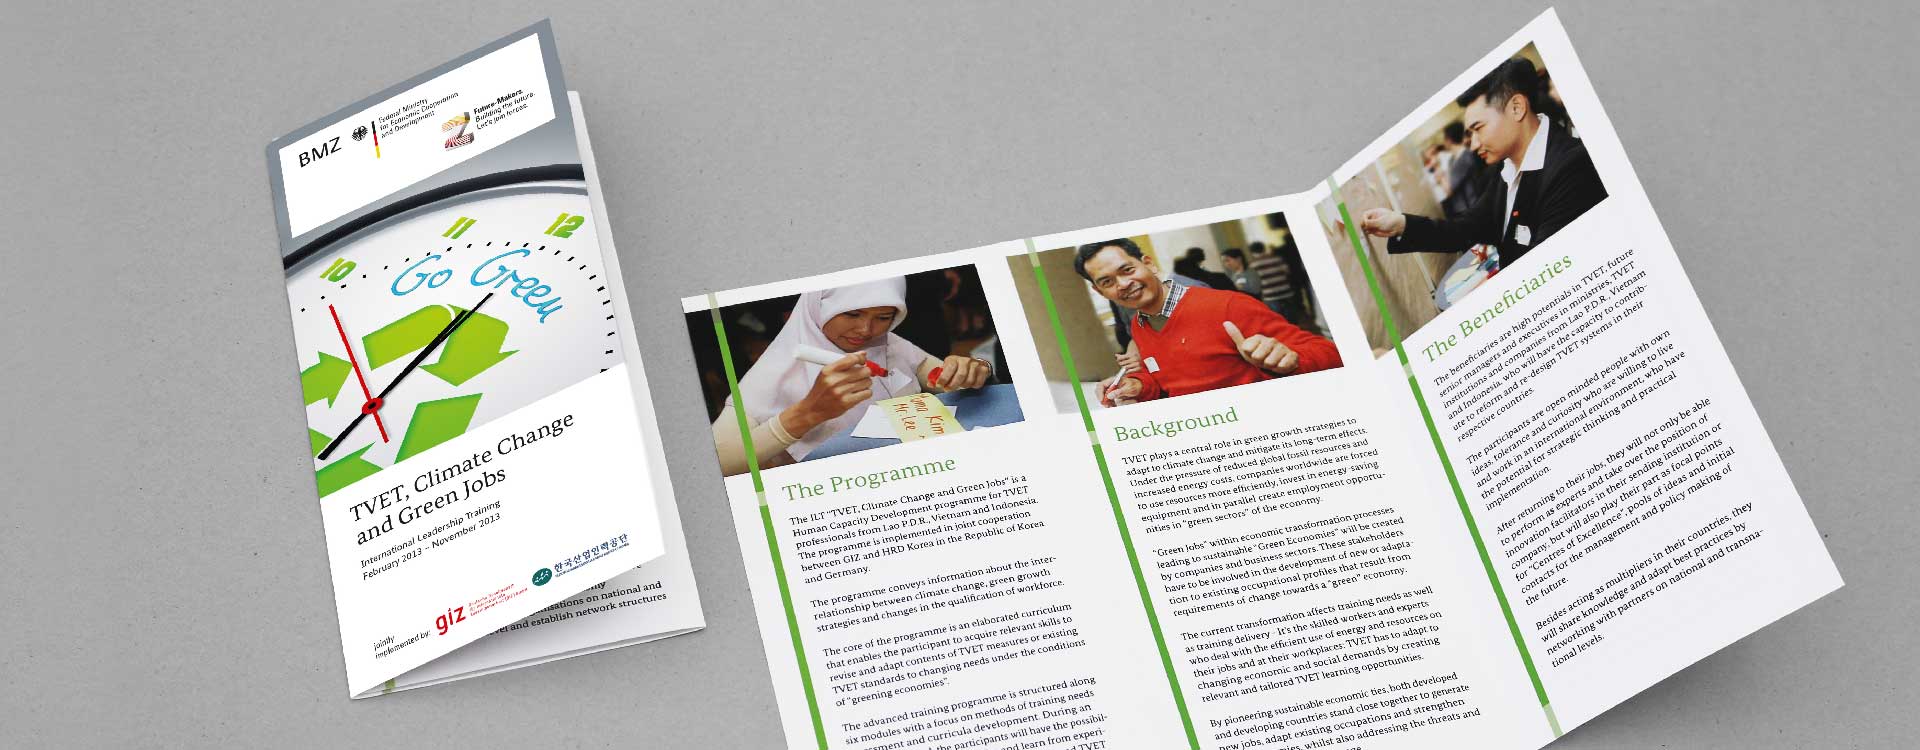 Leaflet for the project of the GIZ Magdeburg Technical Vocational Education and Training, Climate Change and Green Jobs; Design: Kattrin Richter | Graphic Design Studio